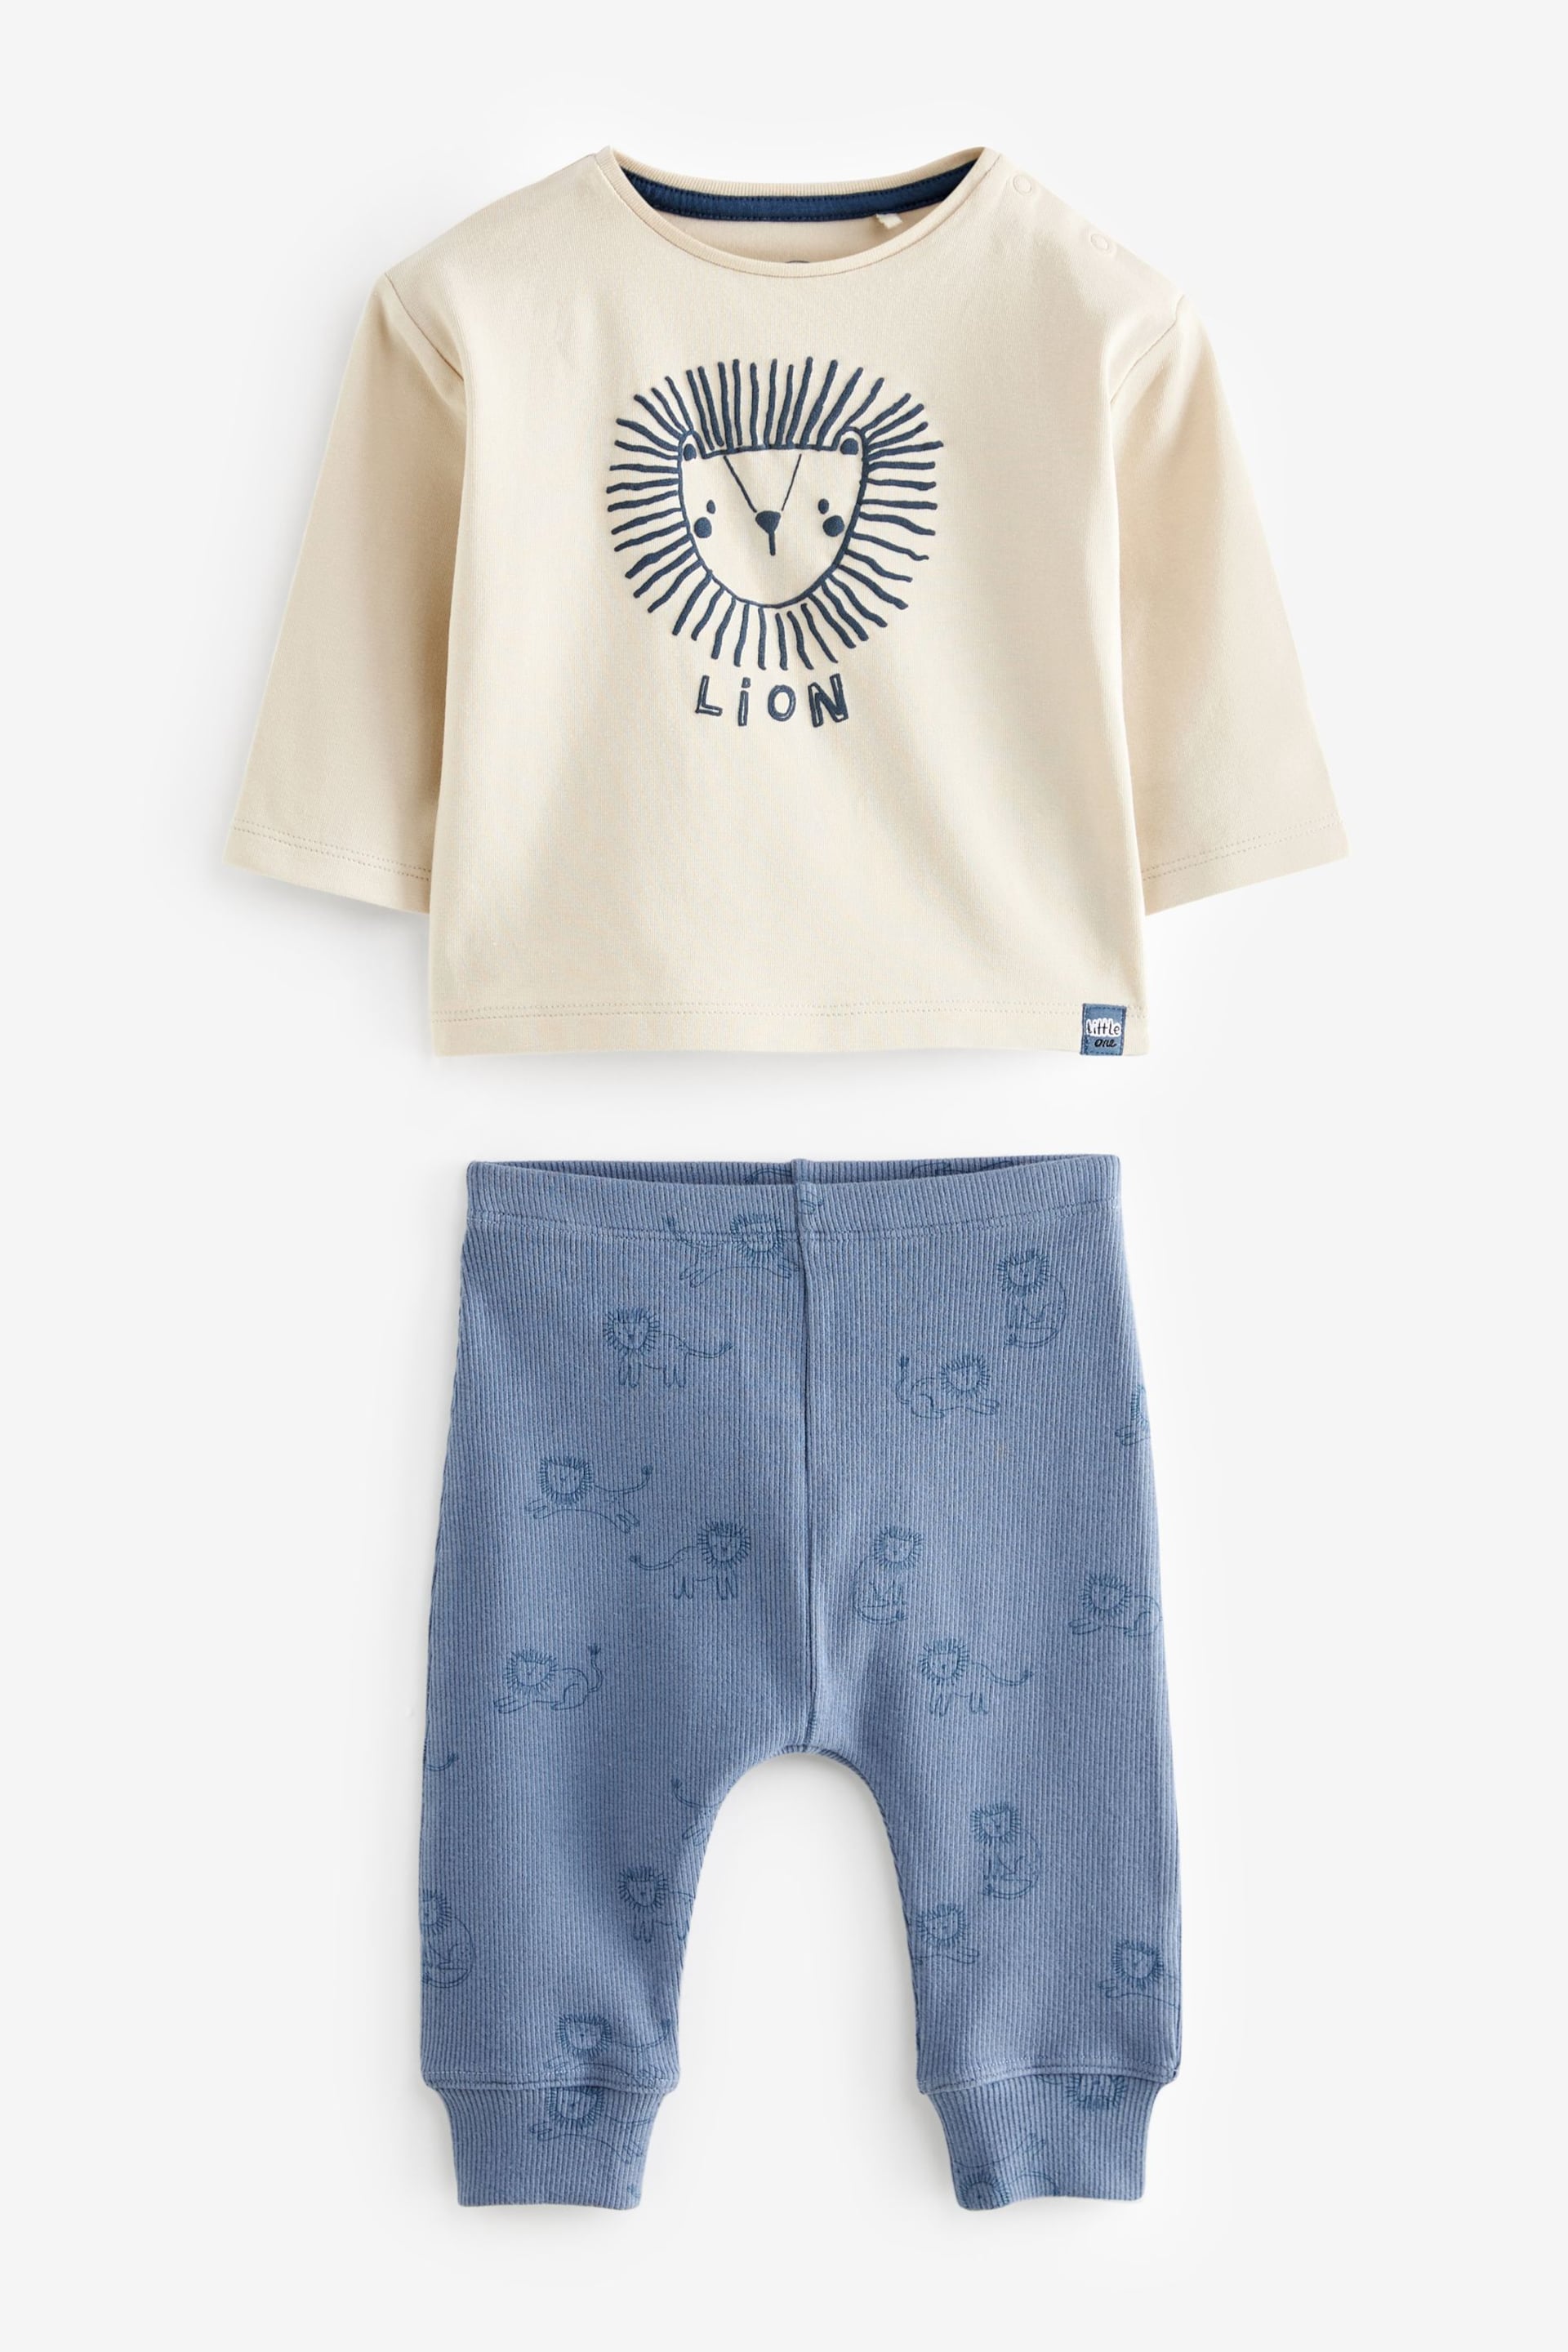 Blue/White Lion Baby Top and Leggings 2 Piece Set - Image 5 of 7